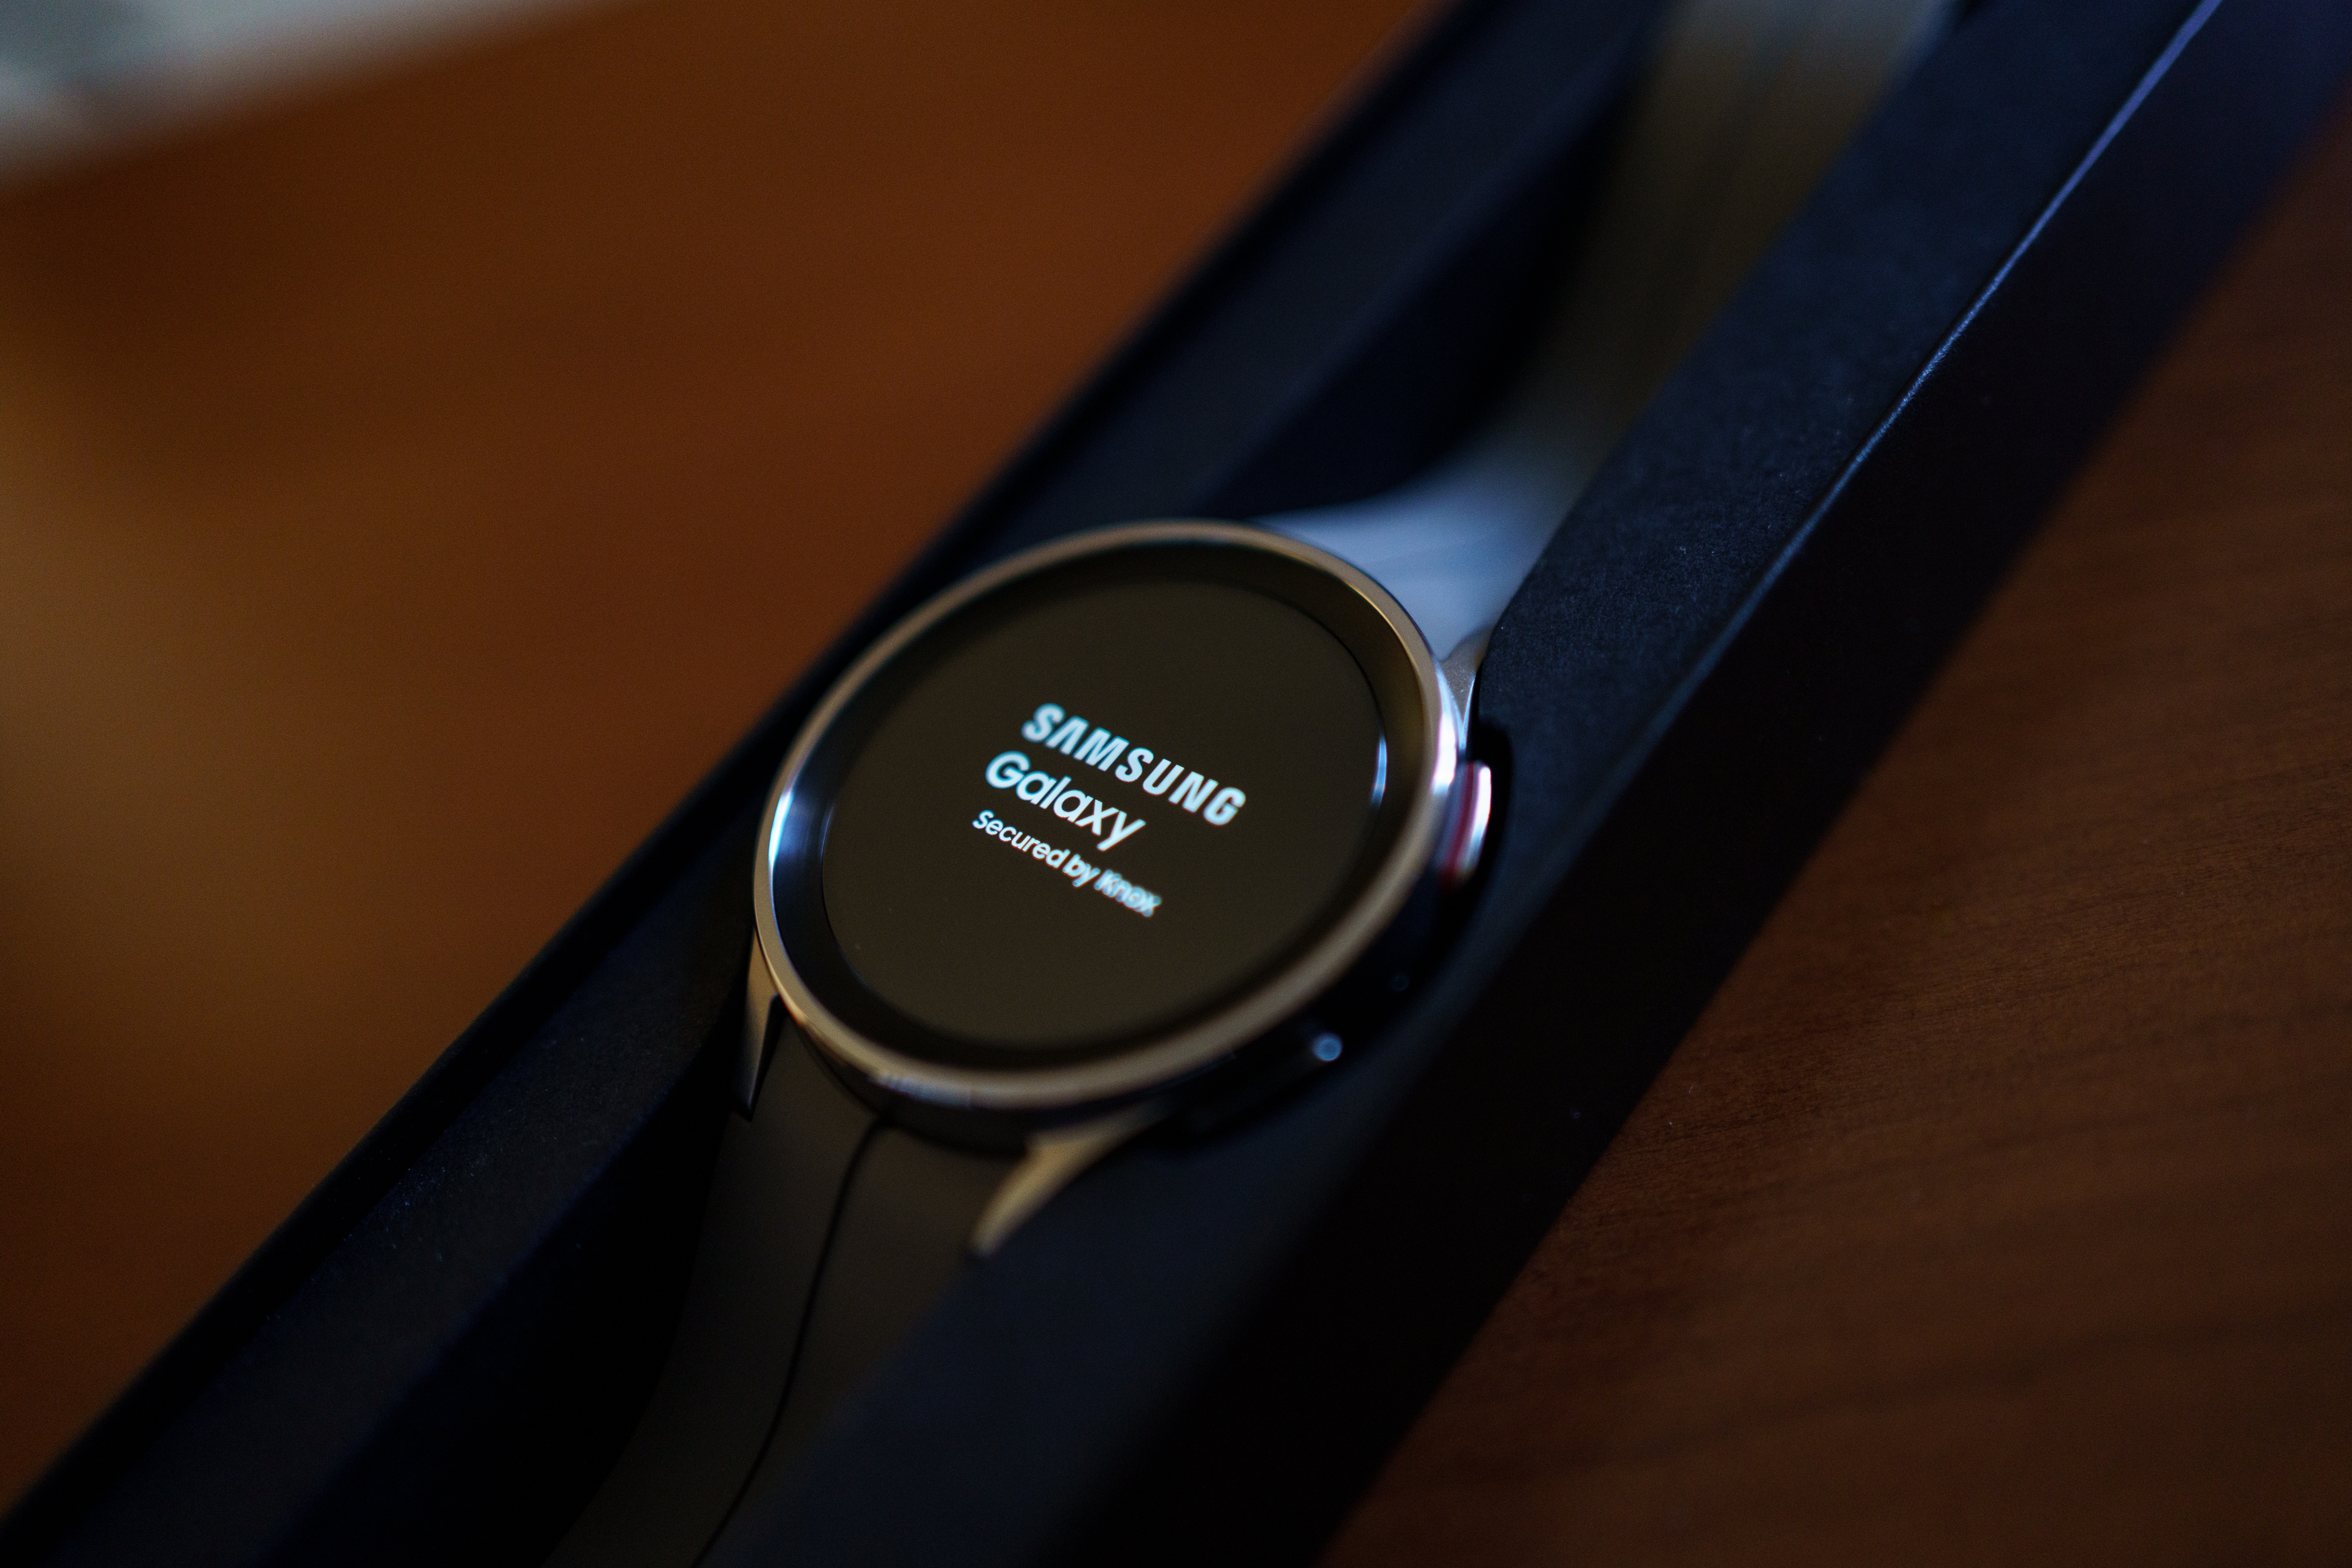 Samsung Galaxy Watch laying on a table